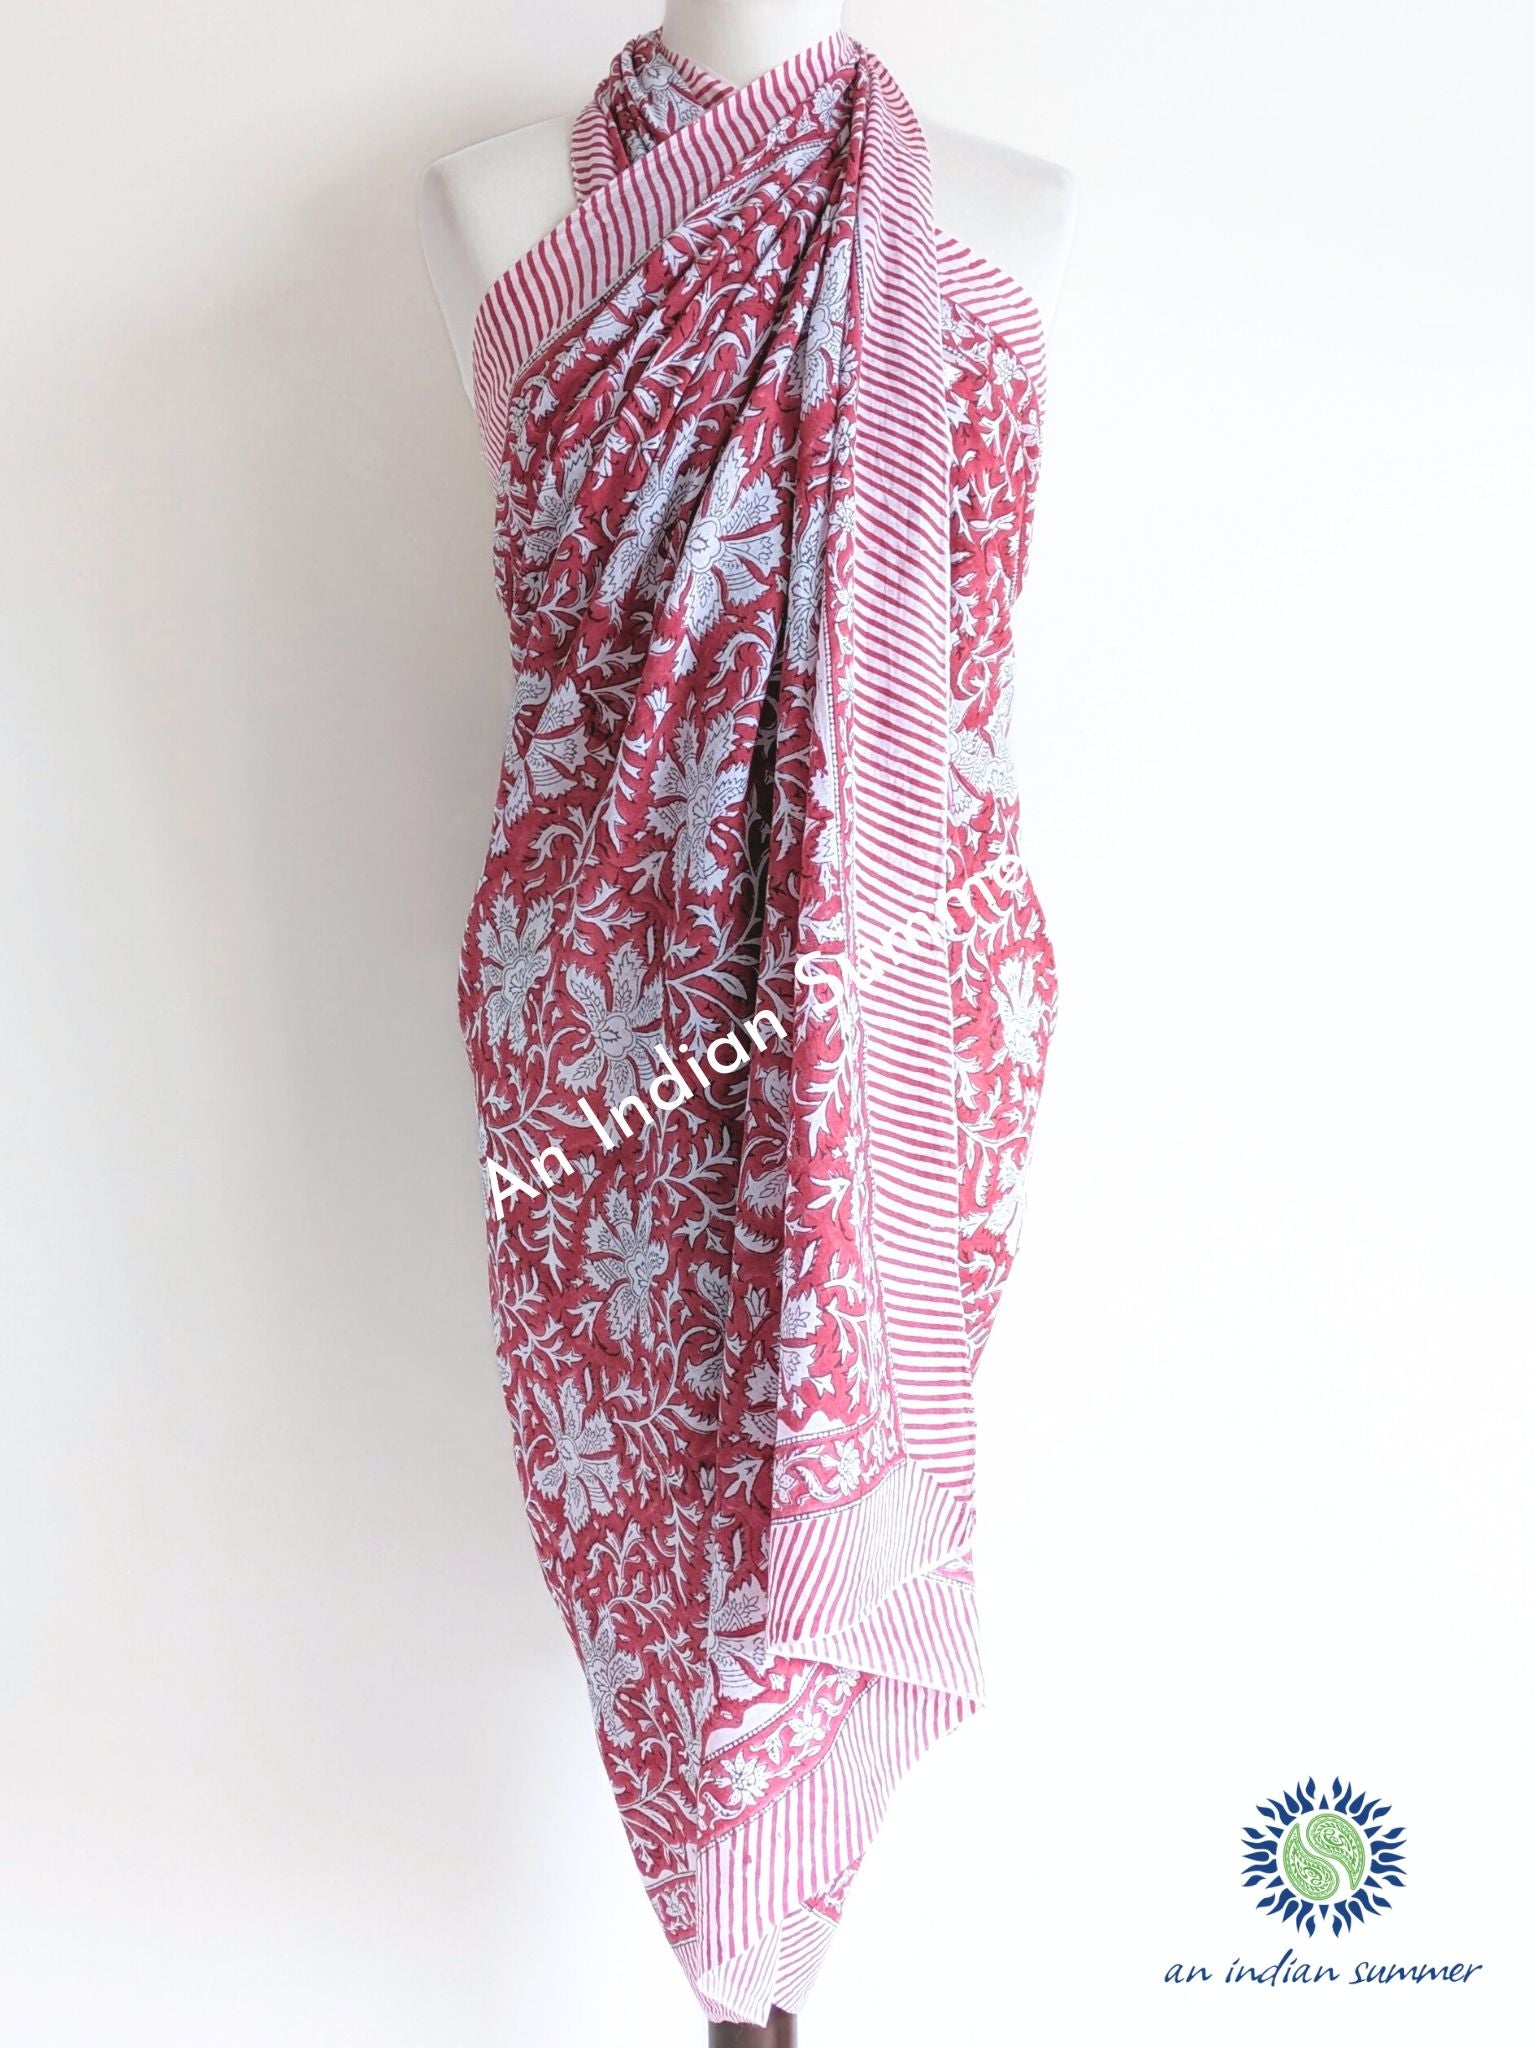 Madder Flower Sarong Pareo | Brick Red | Hand Block Printed | Soft Cotton Voile | An Indian Summer | Seasonless Timeless Sustainable Ethical Authentic Artisan Conscious Clothing Lifestyle Brand